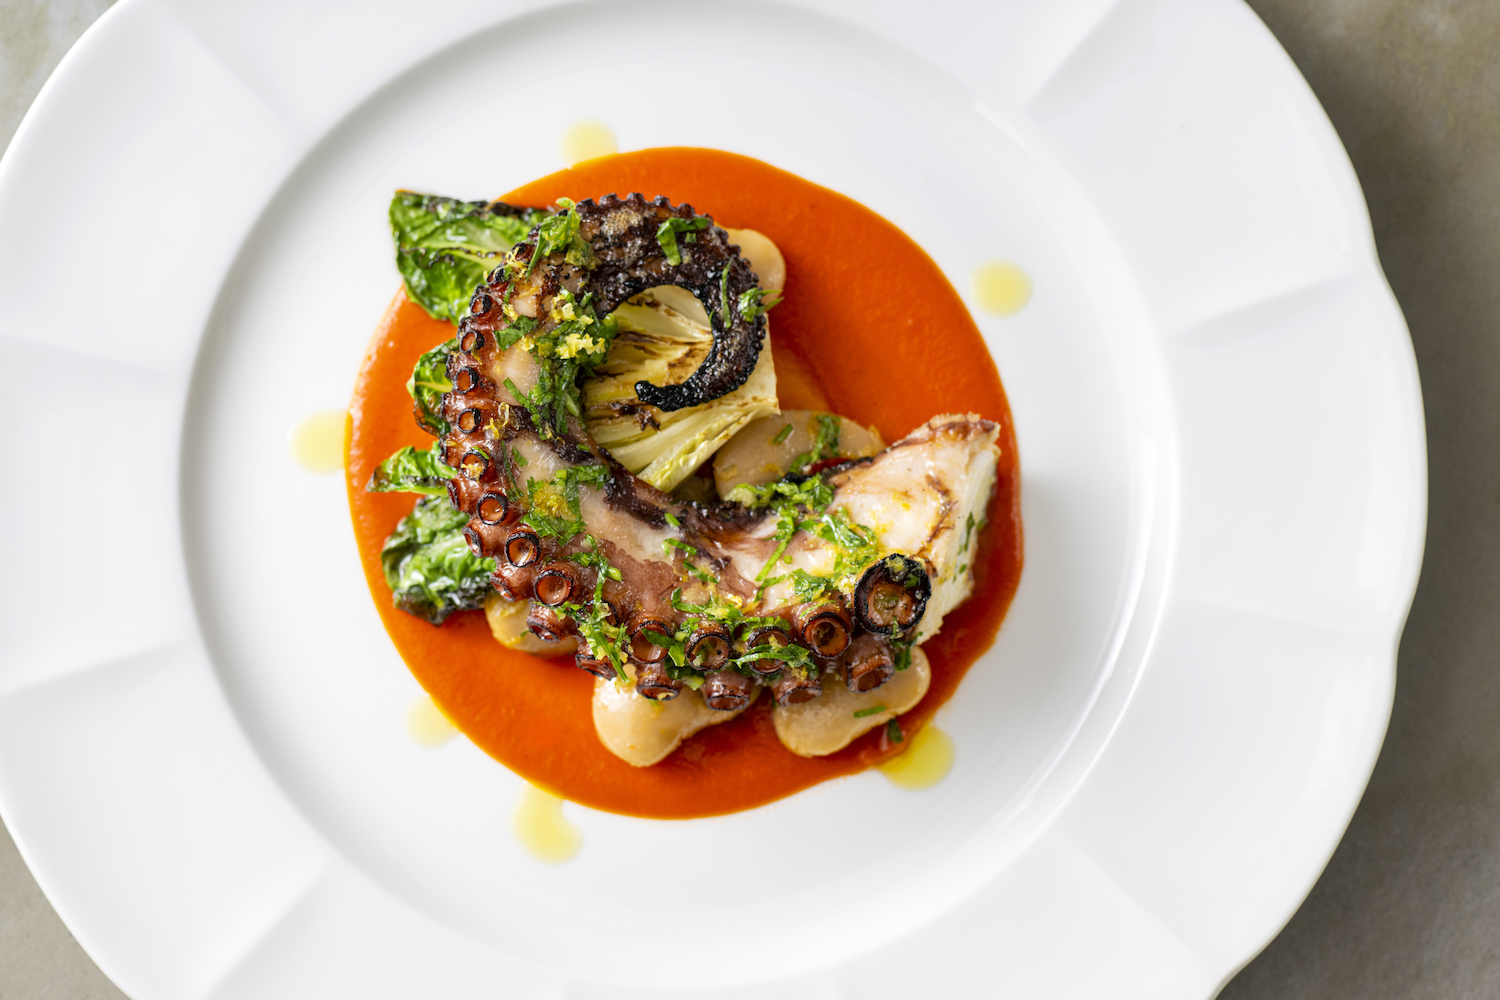 a tentacle of grilled octopus on a white plate with a red sauce